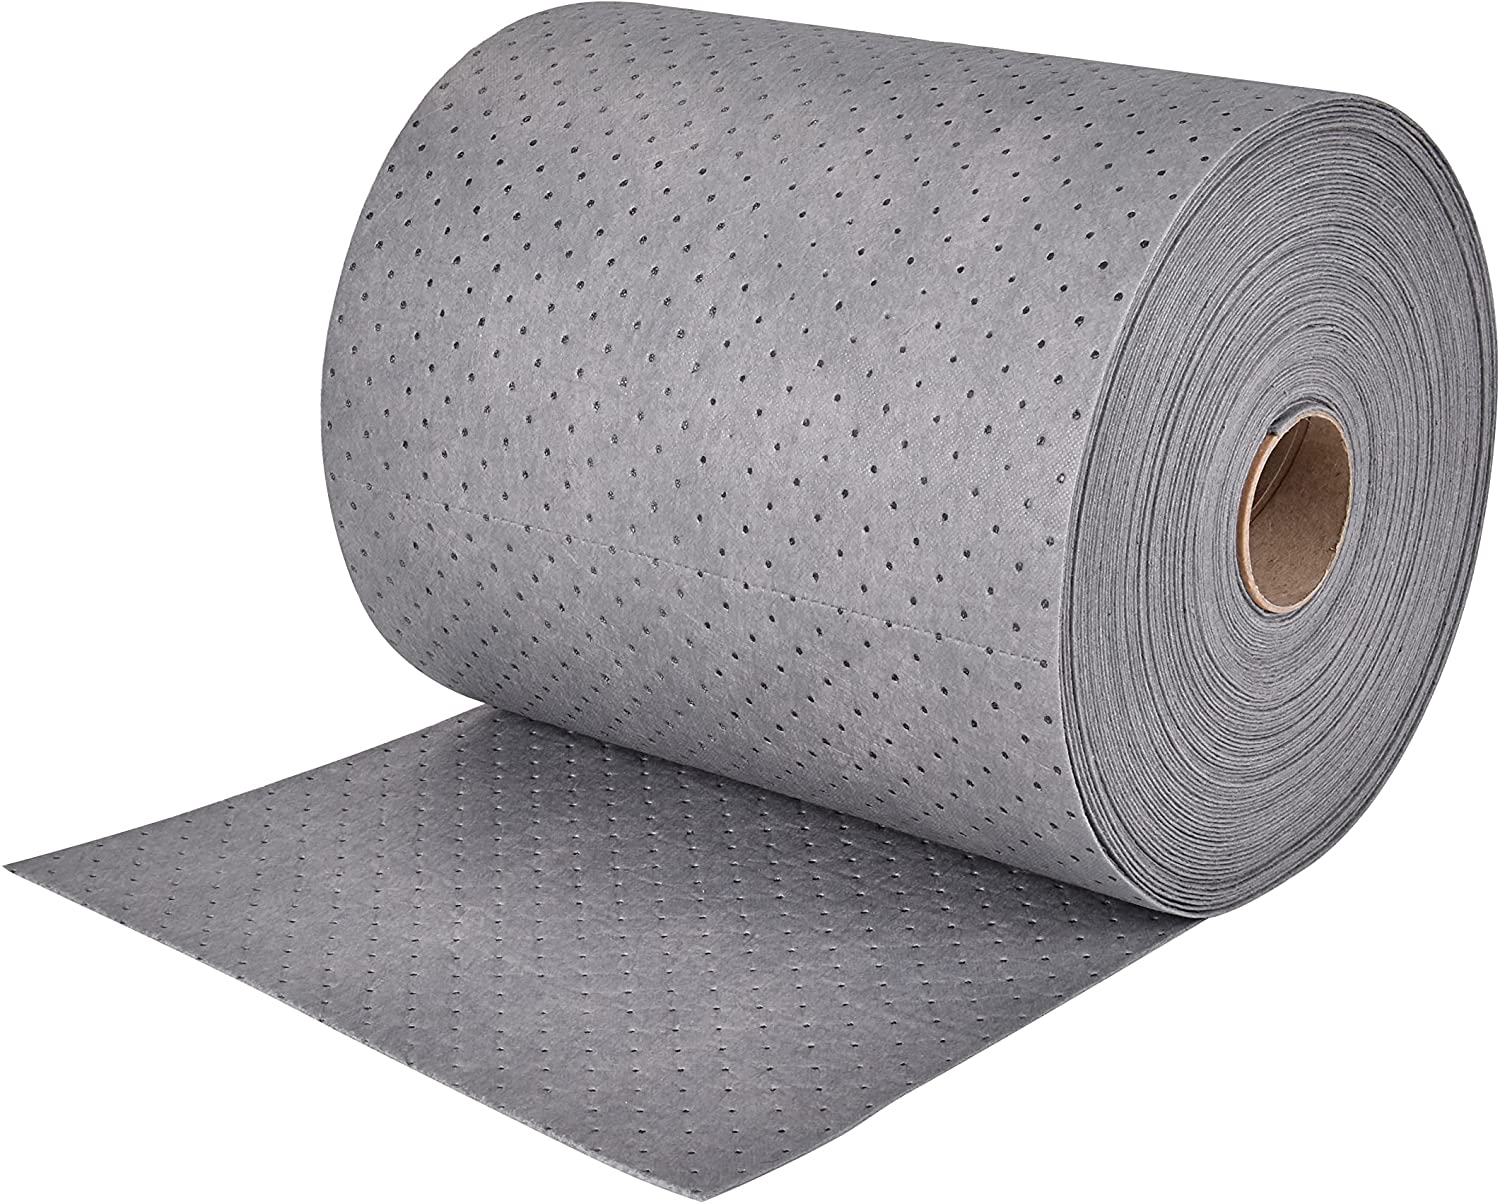 Aain LT010 Gray Oil-Cleanup Premium Heavyweight Absorbent Mat Roll, Absorbs Oils; Coolants; Solvents; Water, Heavyweight, 150' L x 15 inch W